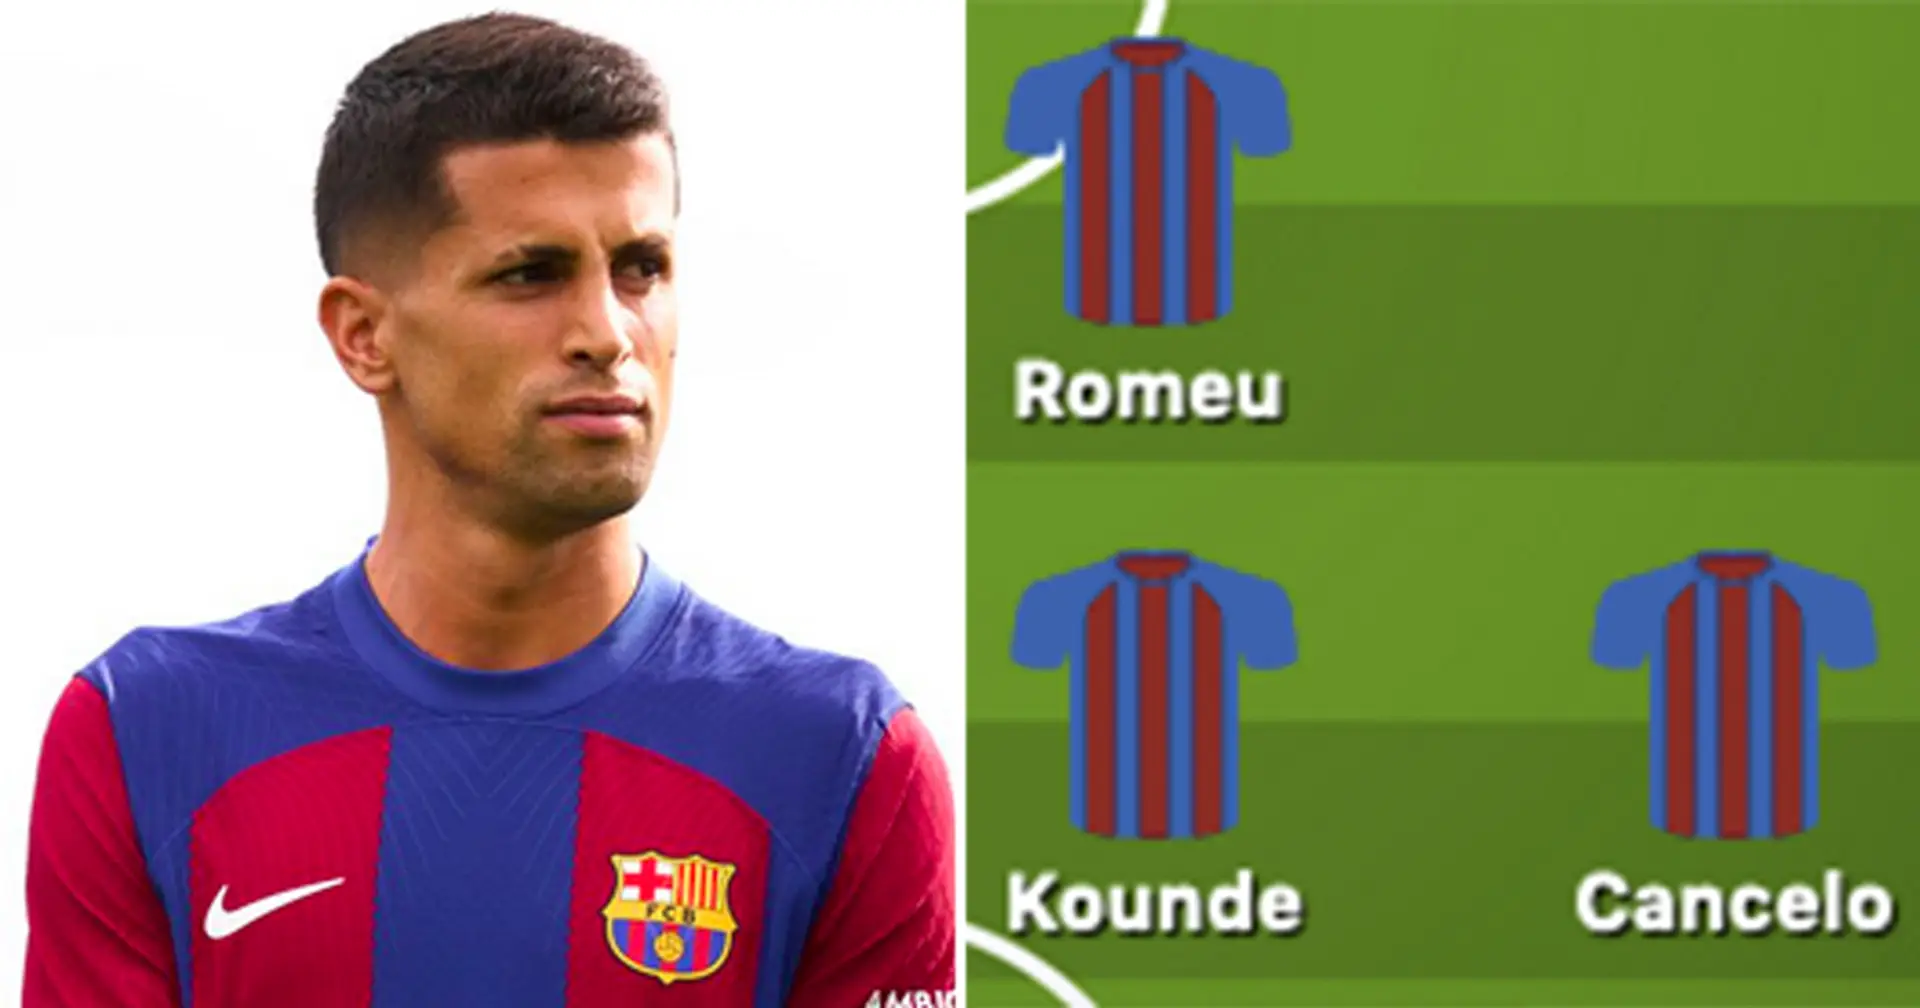 Barca's strongest XI after summer transfer business shown in lineup